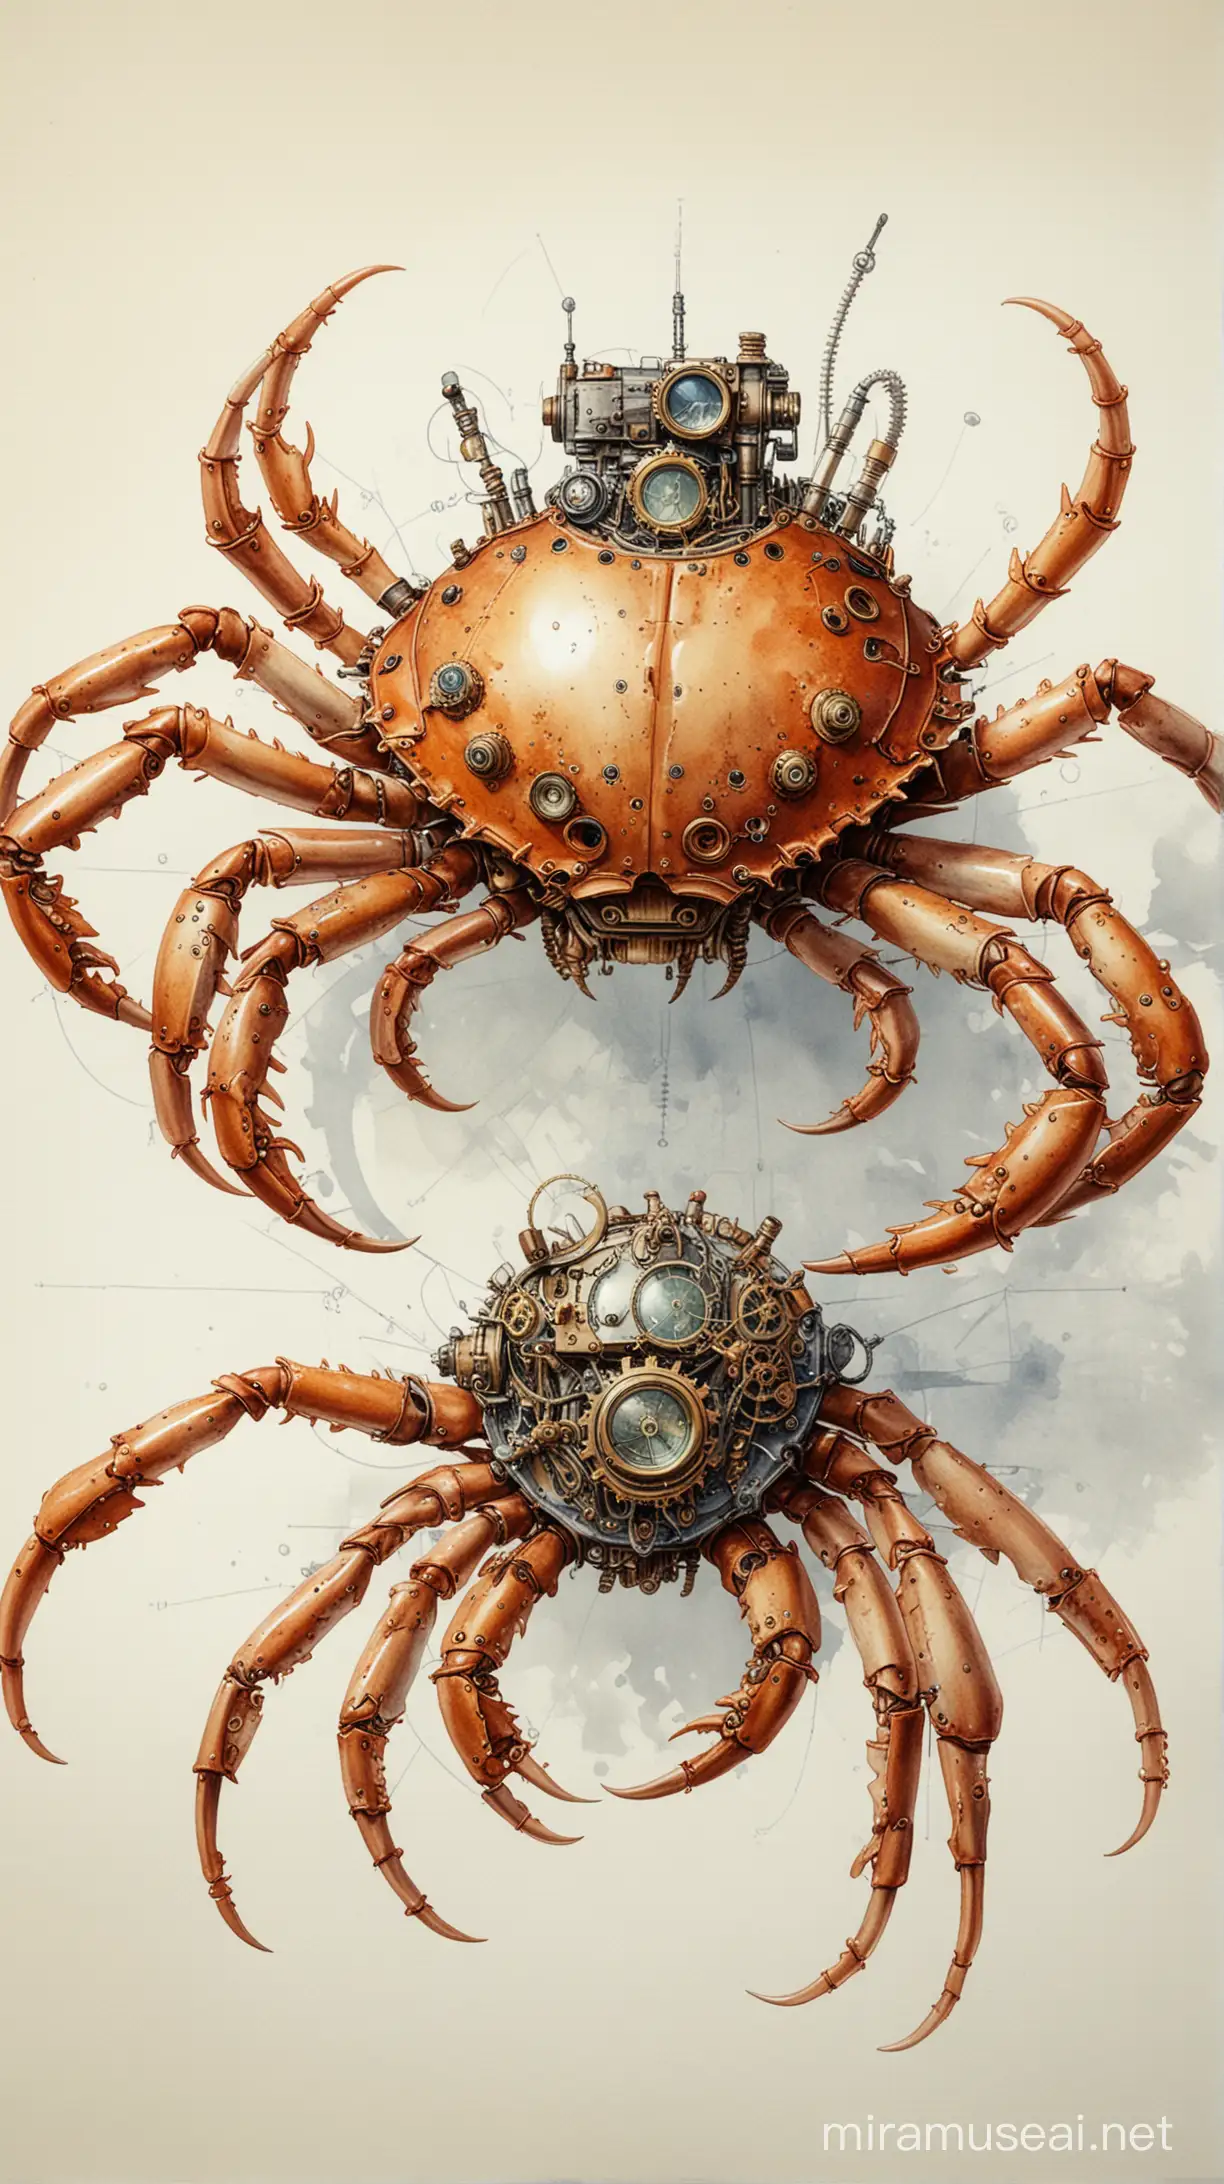 Steampunk Crab Technical Drawing with Intricate Anatomical Details in Watercolor